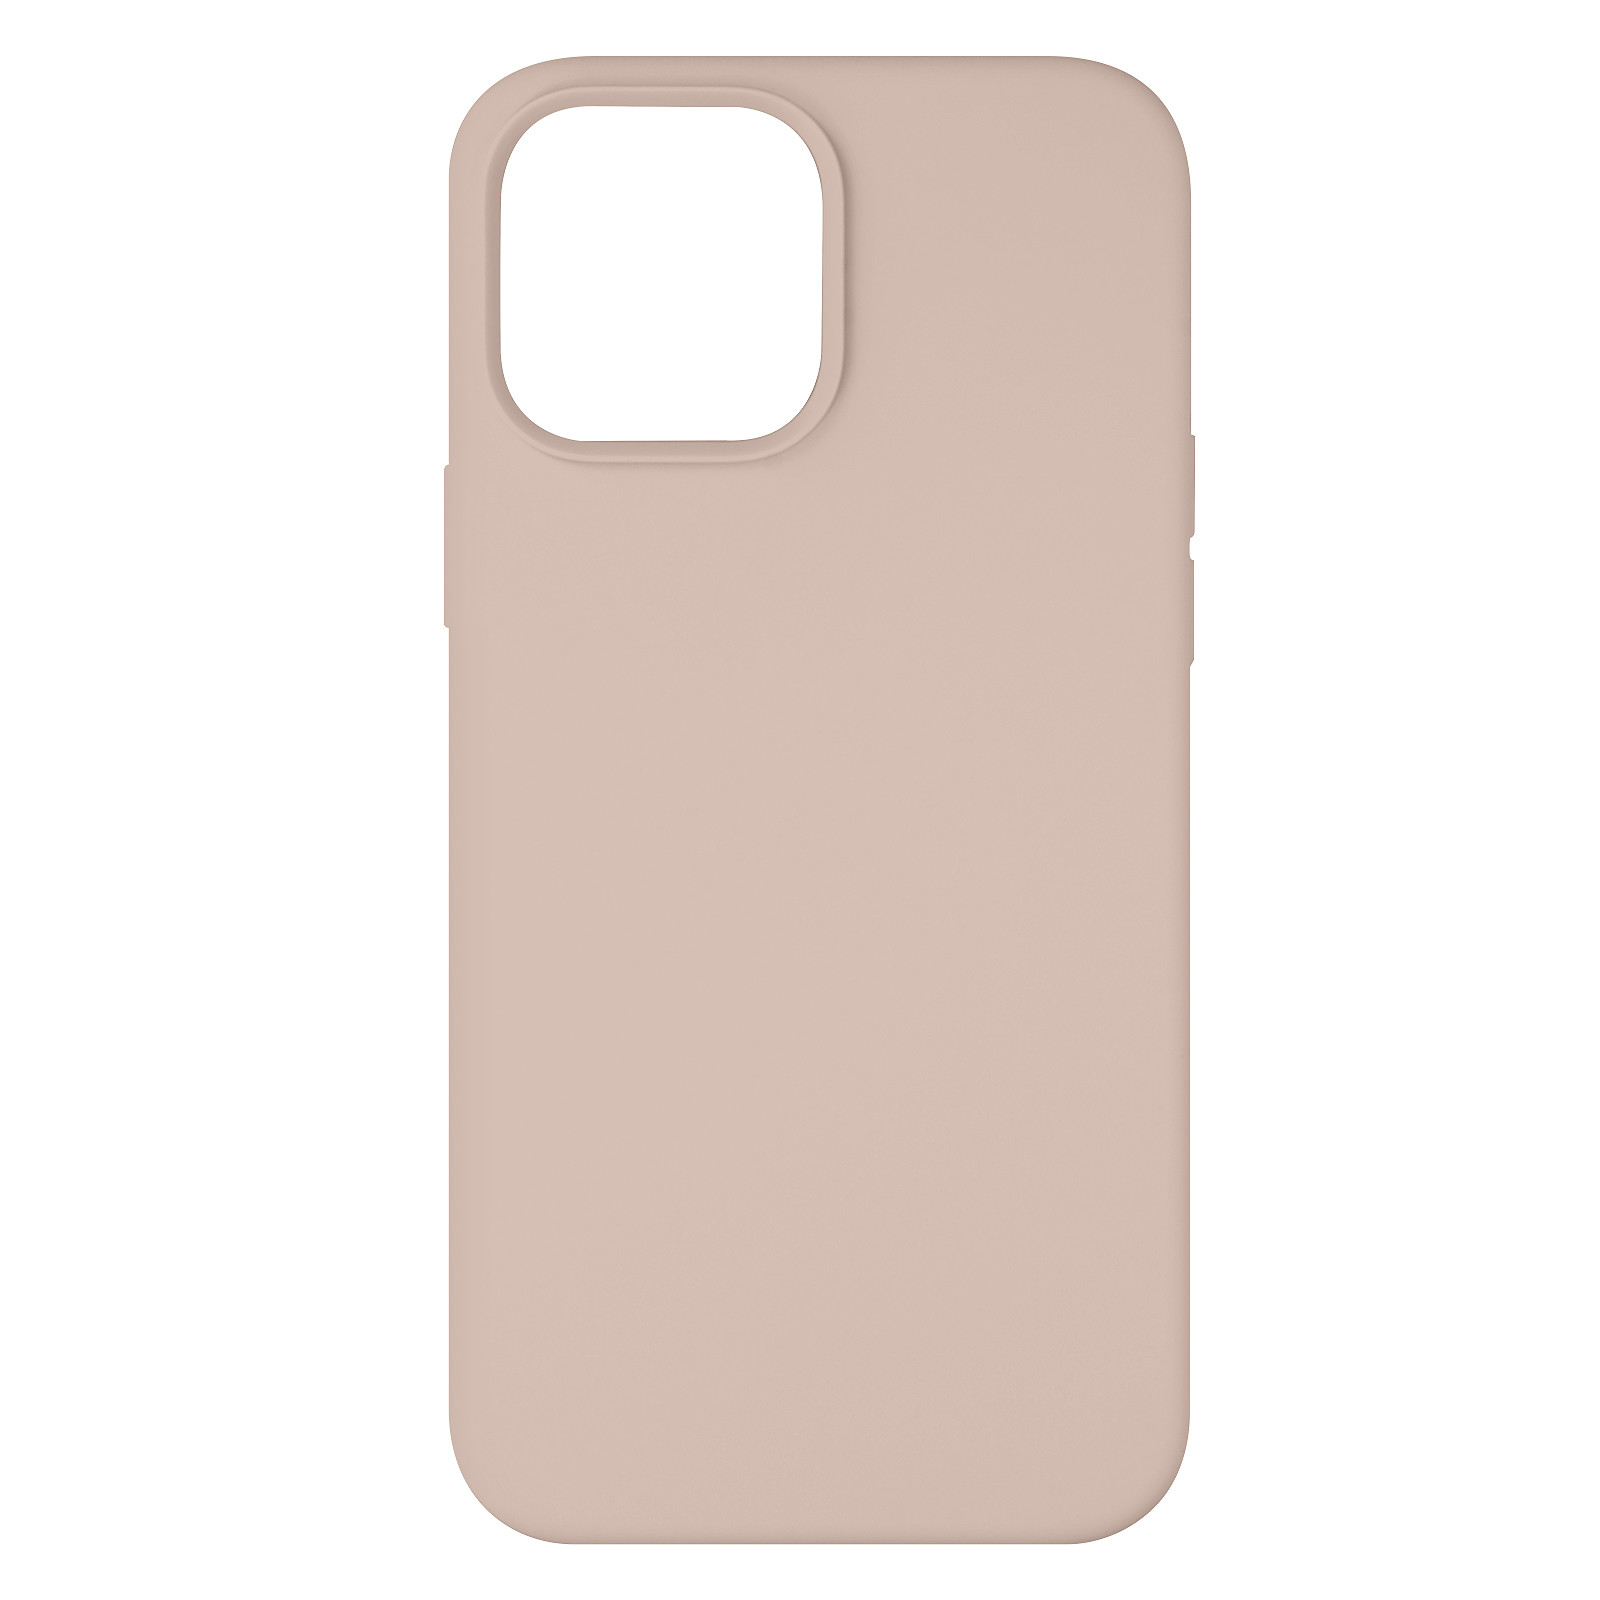 Avizar Coque pour iPhone 13 Pro Compatible Magsafe Finition Soft-Touch Rose pastel - Coque telephone Avizar